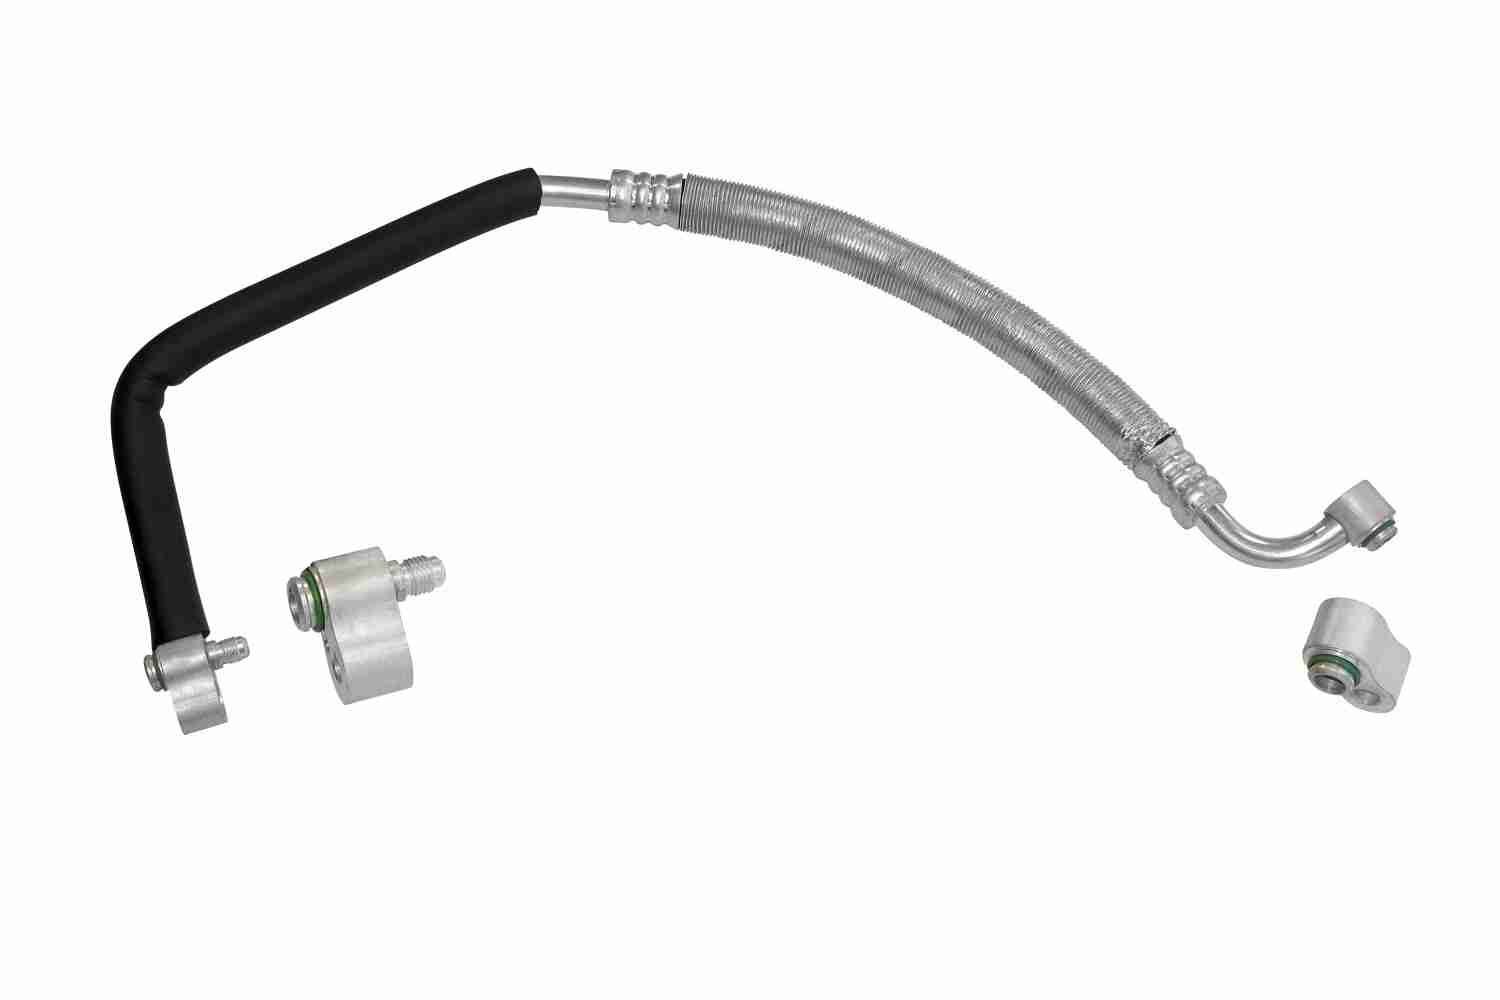 BMW X3 Air conditioning hose 2291702 VEMO V20-20-0012 online buy